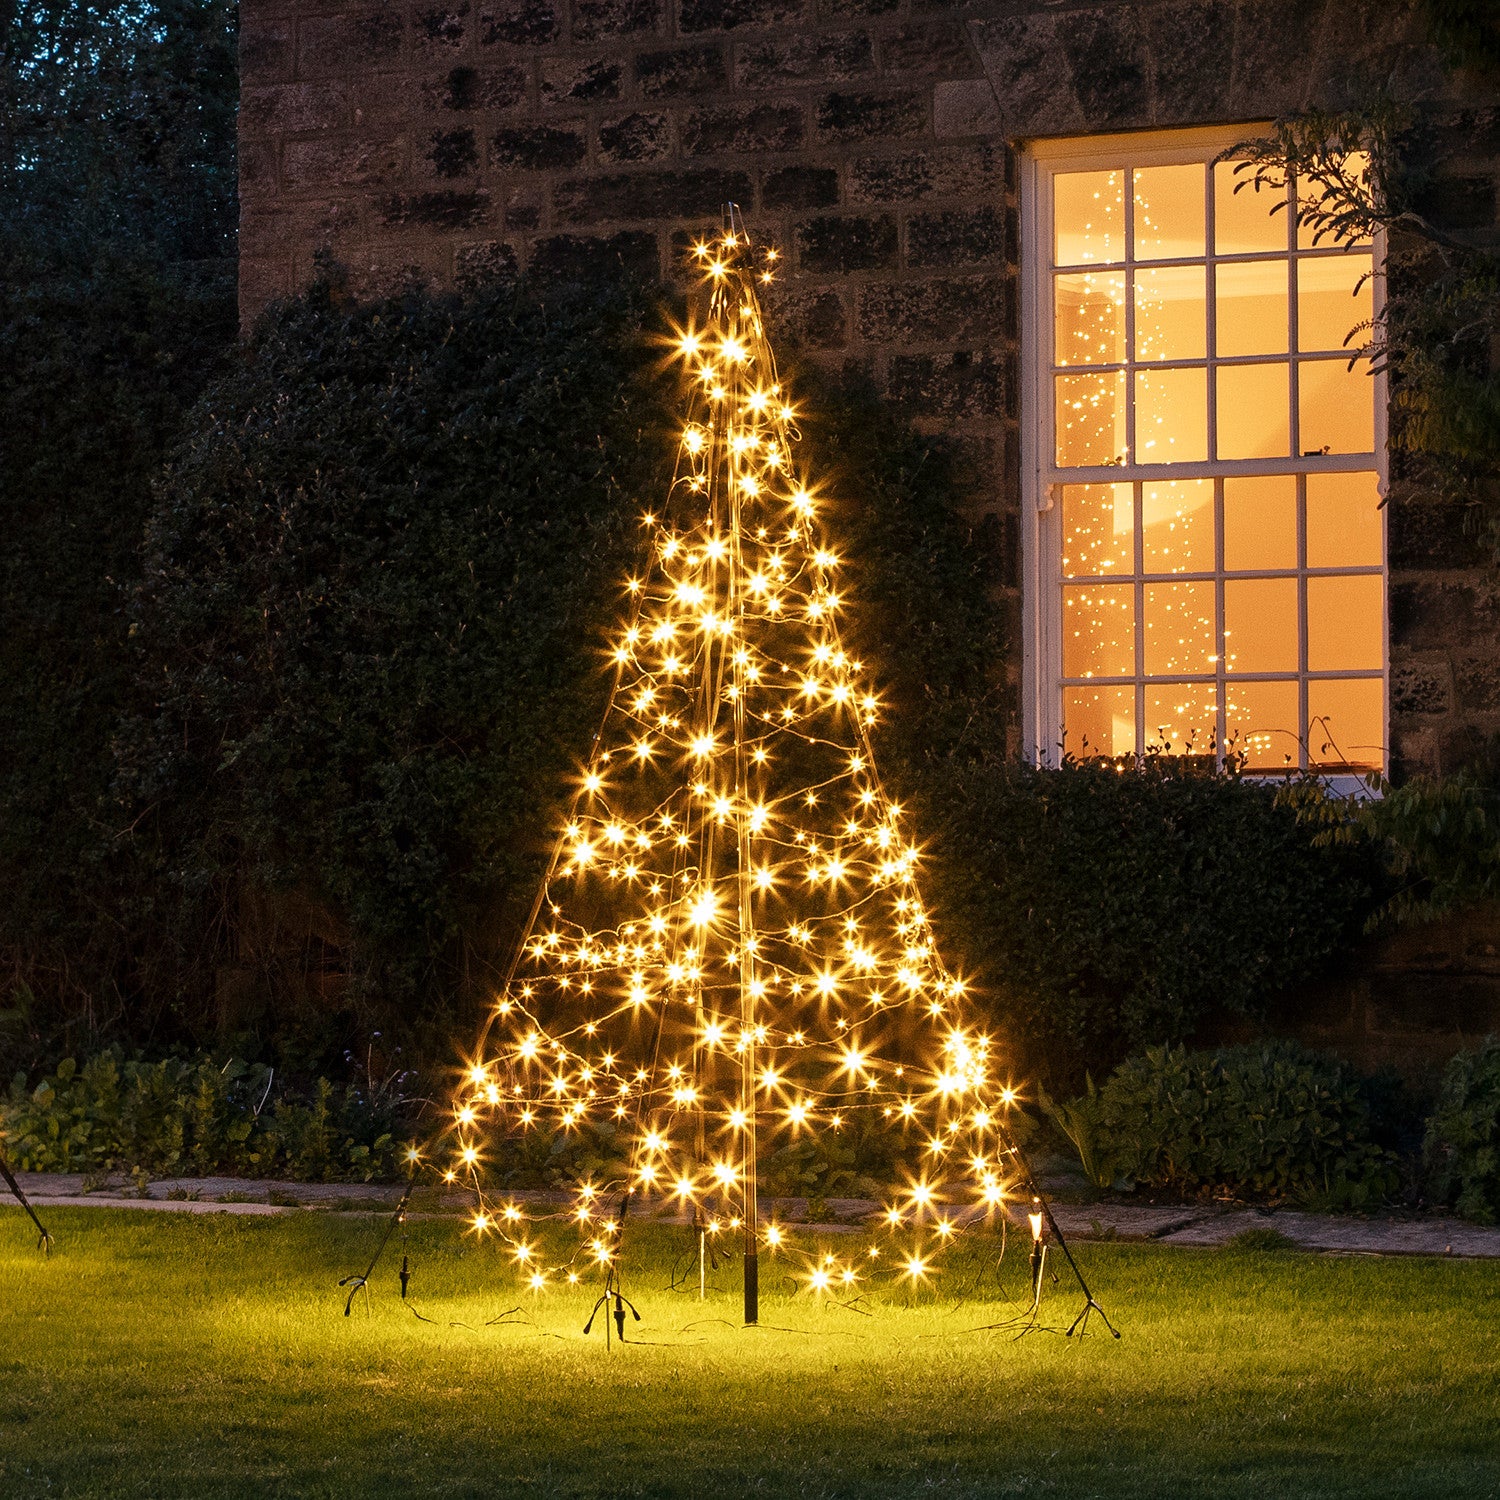 Outdoor Christmas Tree - Photos All Recommendation